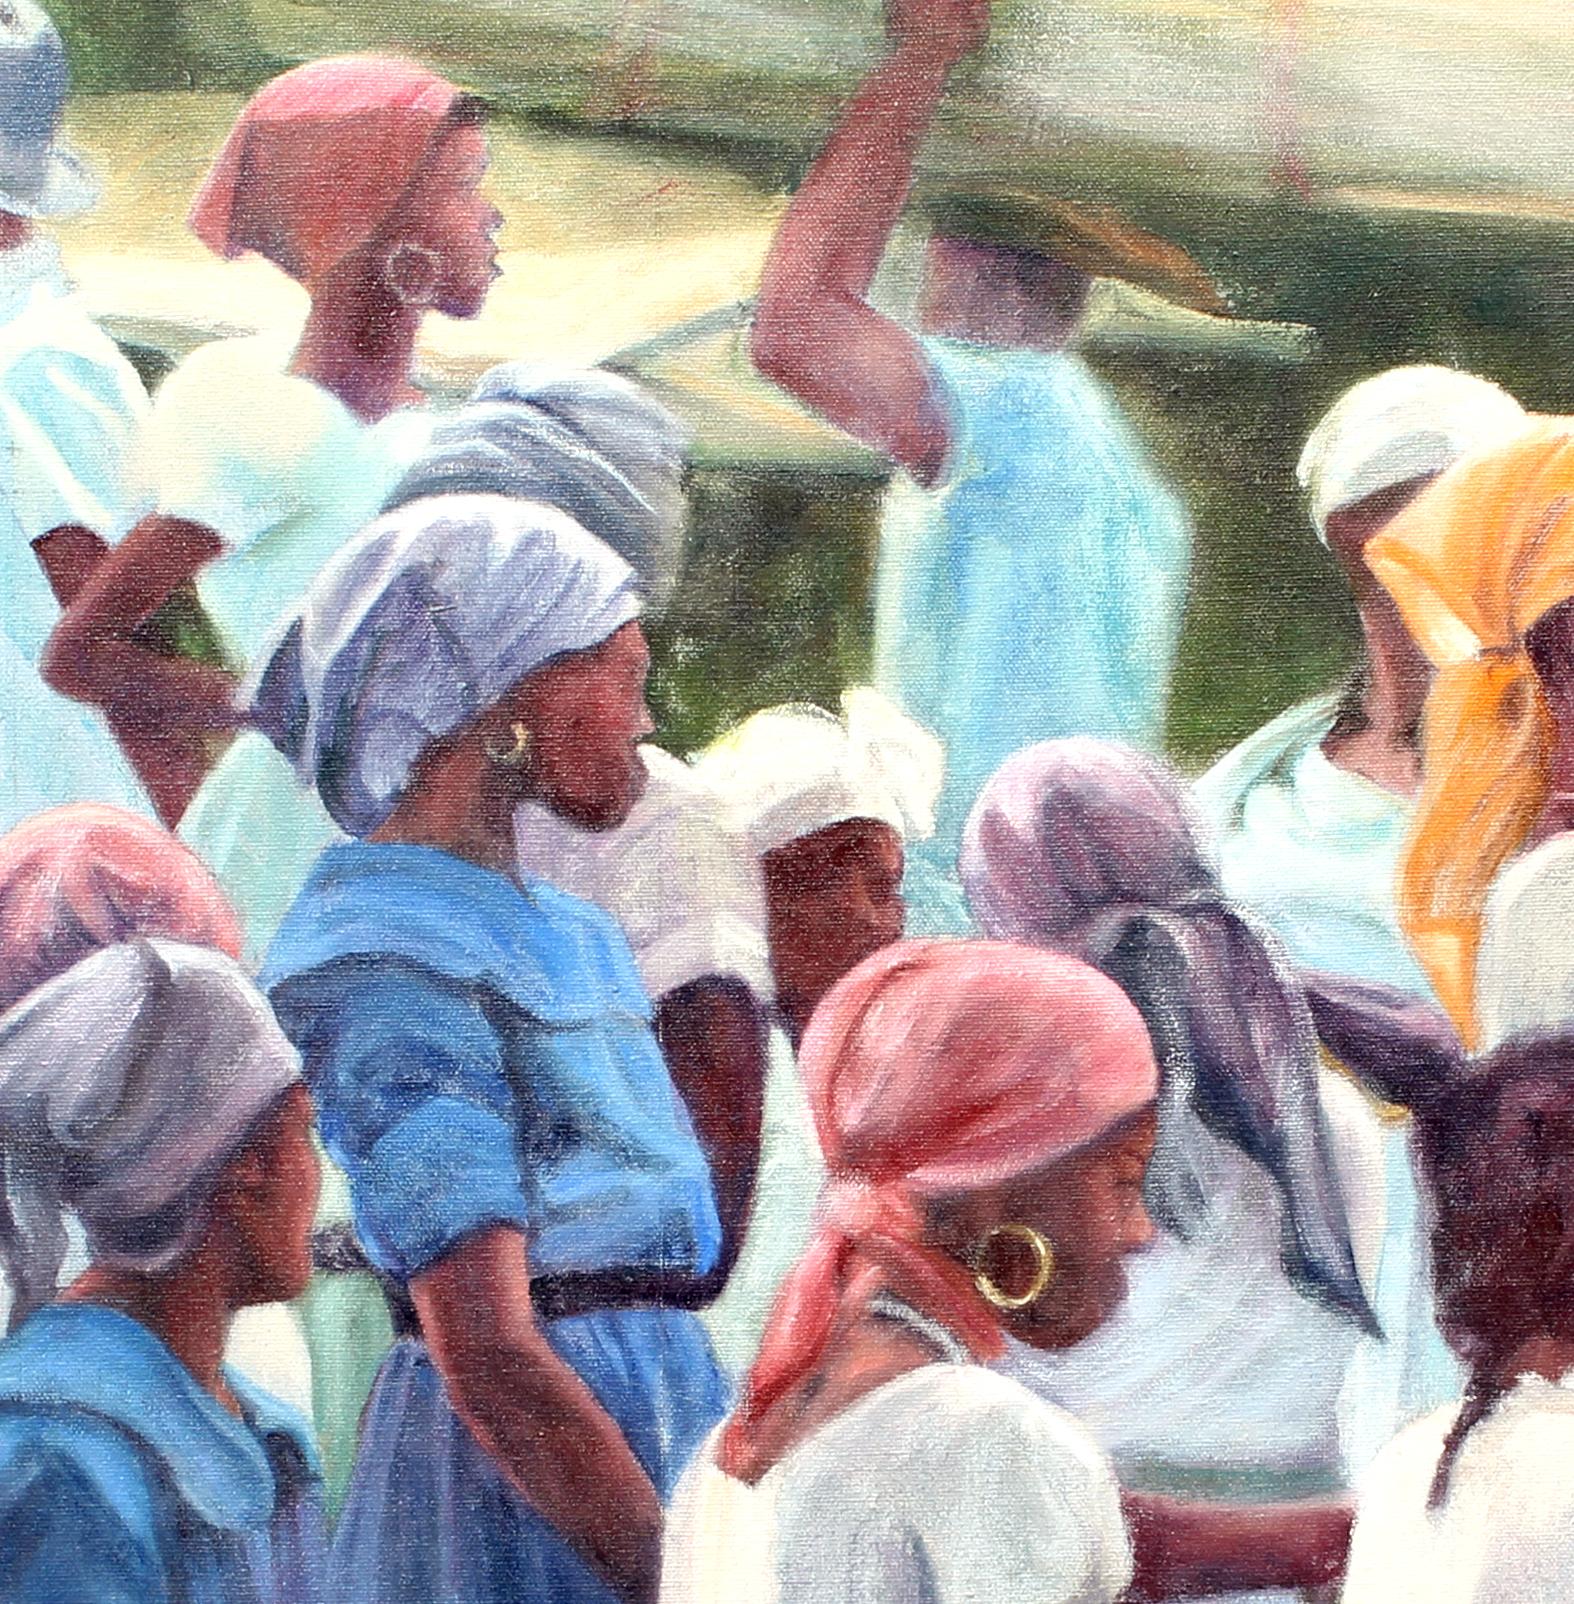 Vintage Oil Painting of Haitian Women by Bette May 1